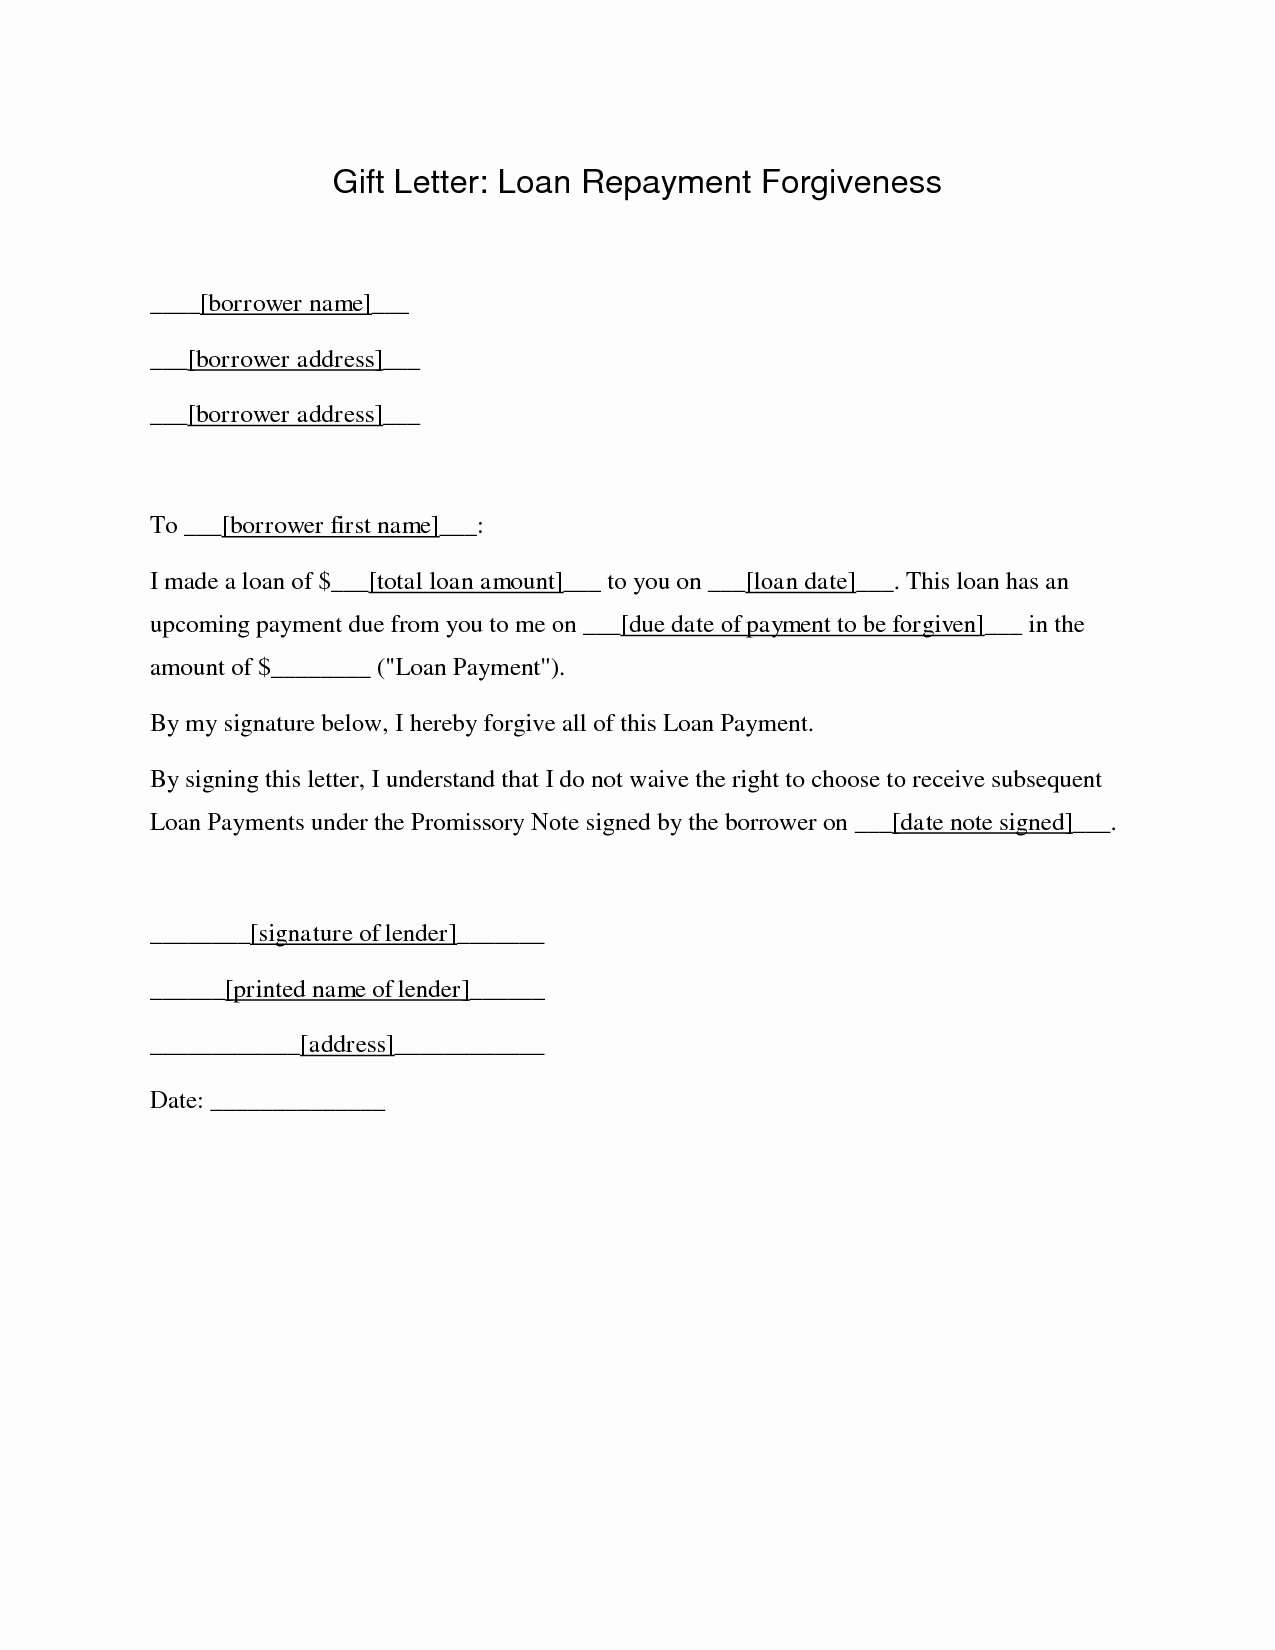 Personal Loan Letter format Elegant Personal Loan Repayment Letter Template Examples